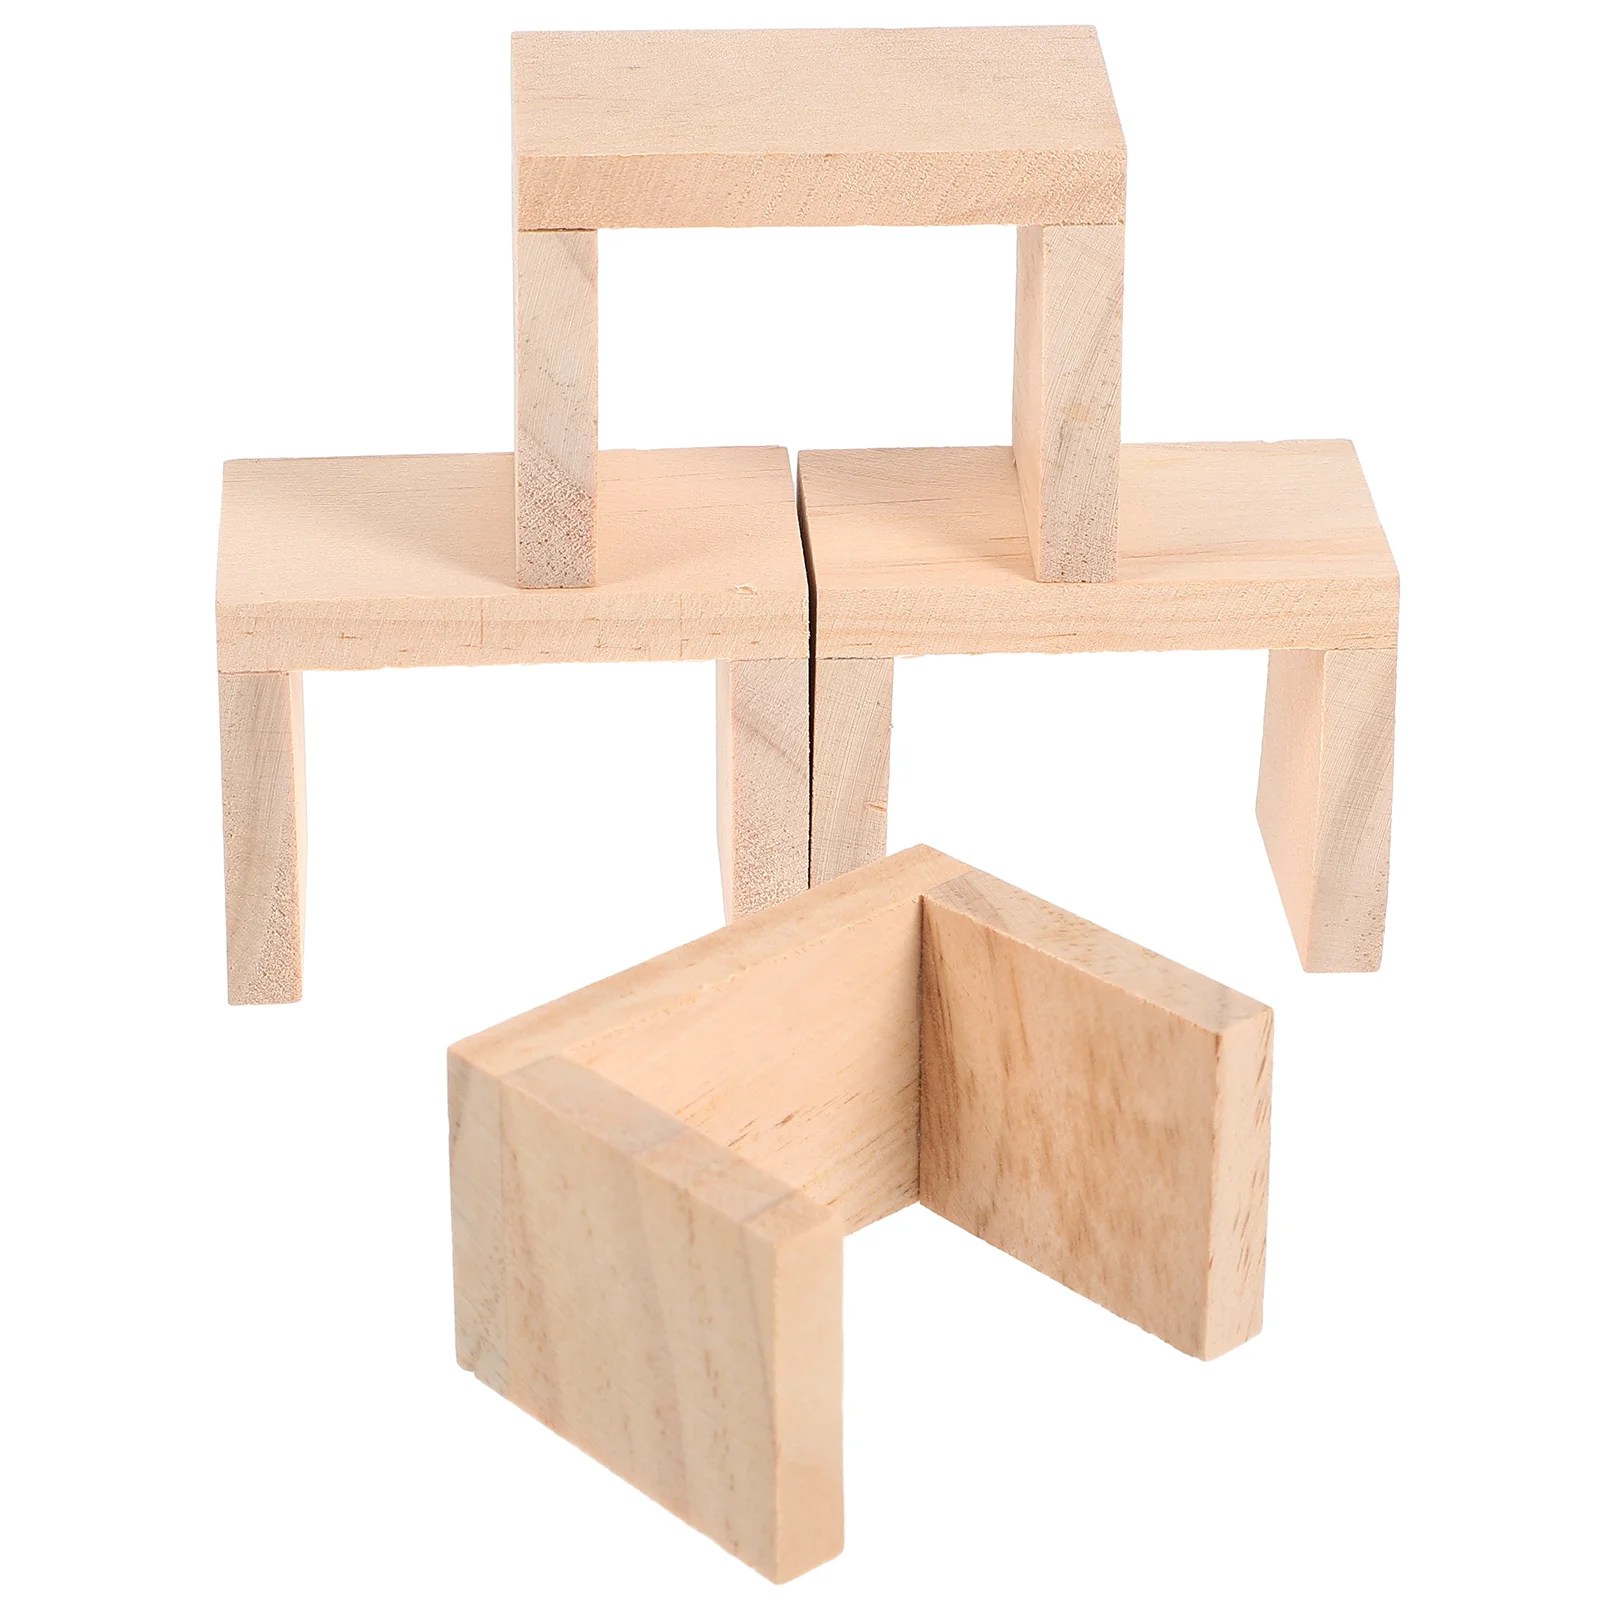 

4 Pcs Dollhouse Stool Mini Wooden Kids Chairs for Table Furniture Model Miniature Other Products Layout Prop